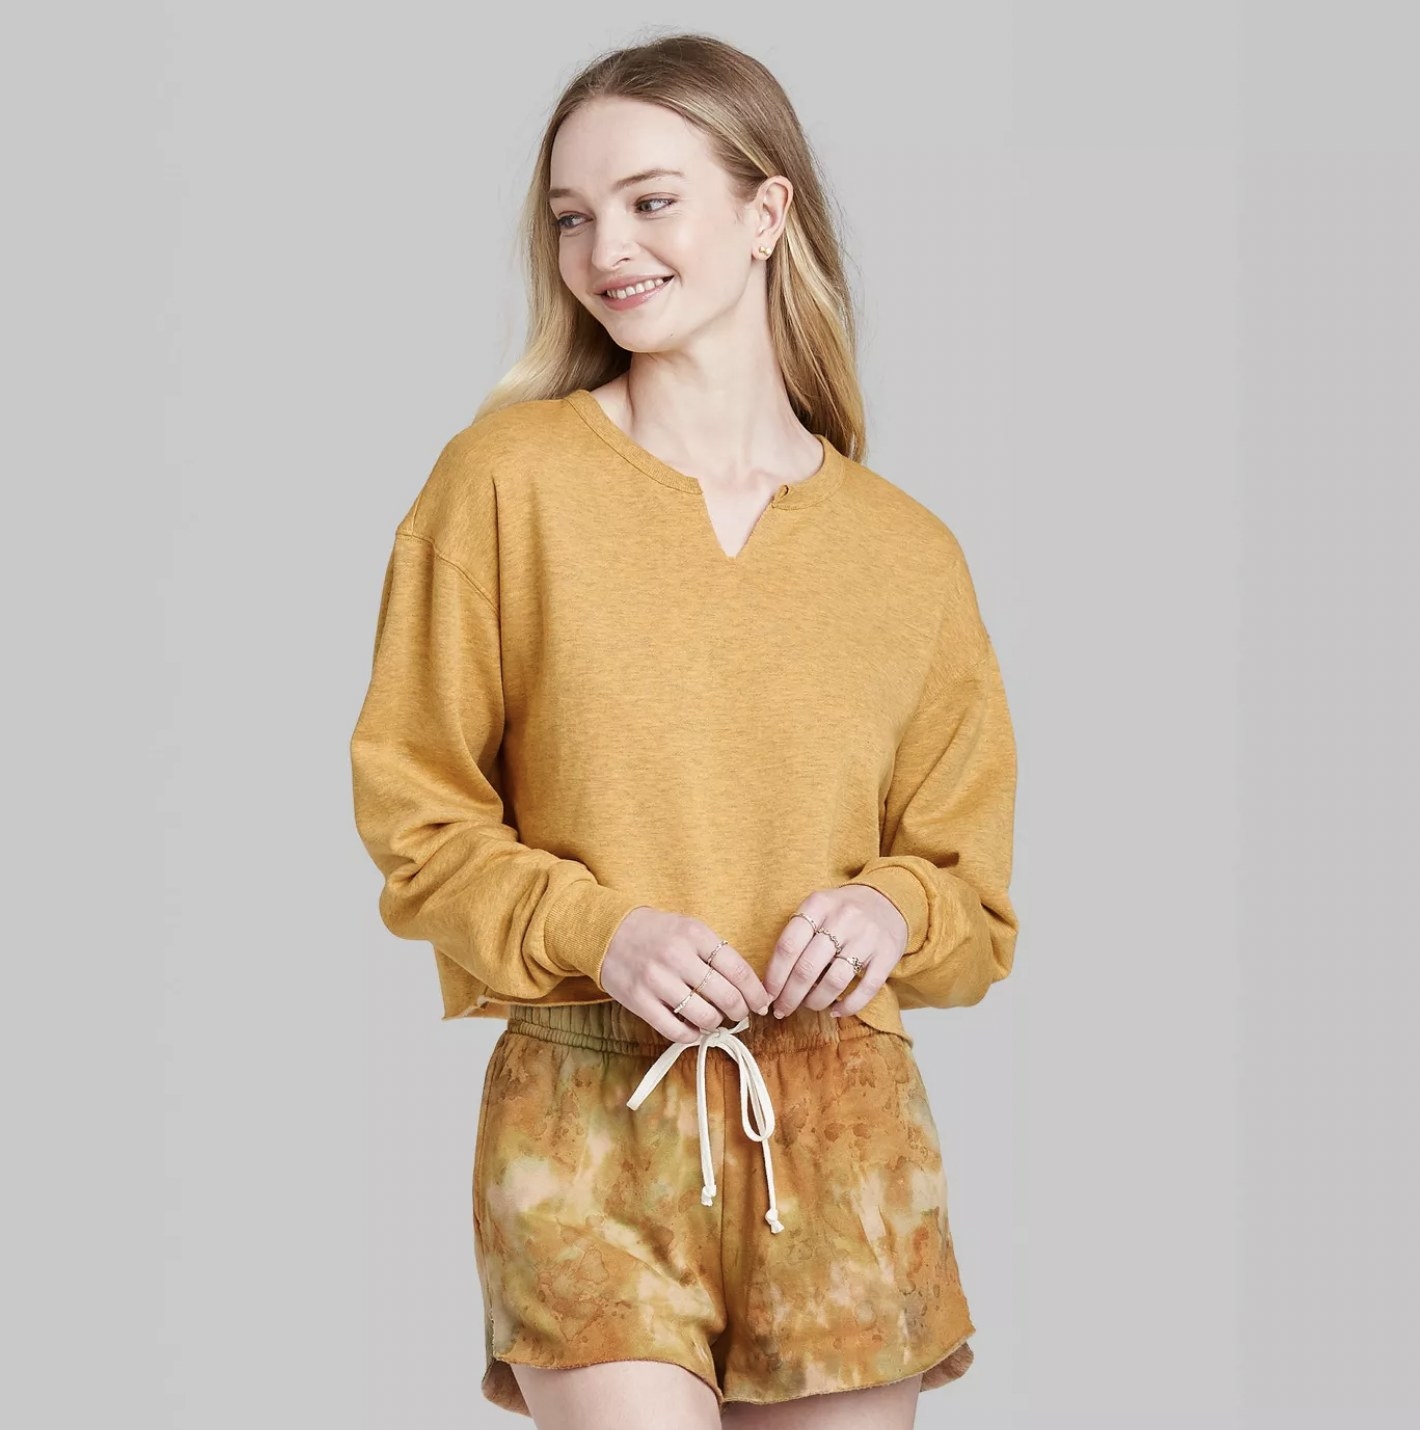 Model in the mustard sweatshirt style top and tie-dye shorts